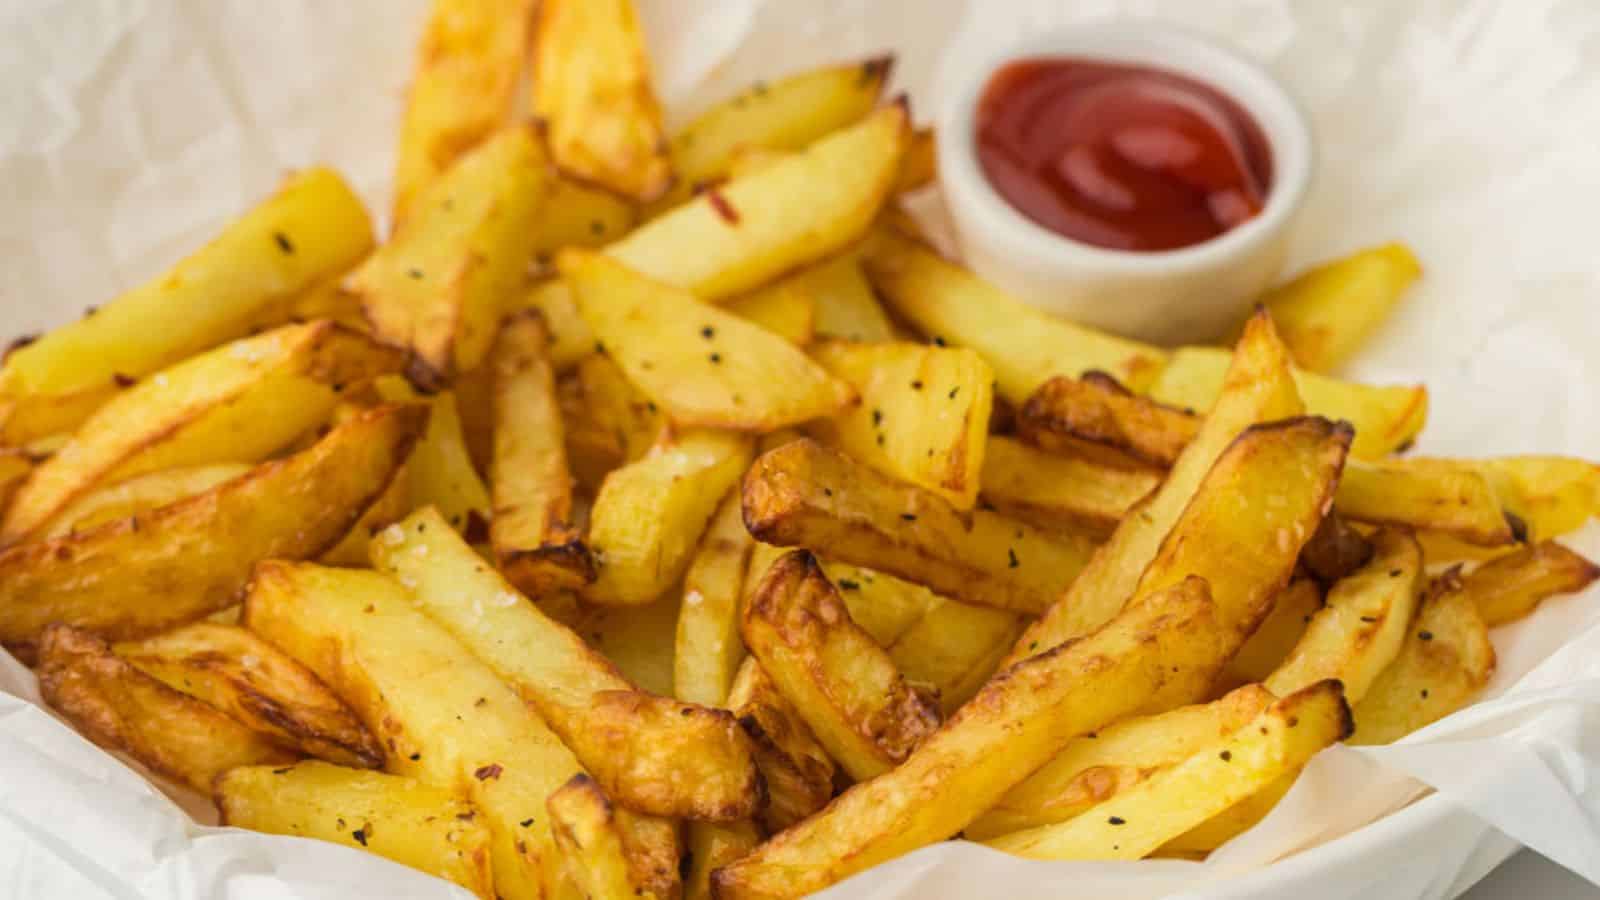 A serving of golden-brown french fries with a side of ketchup.